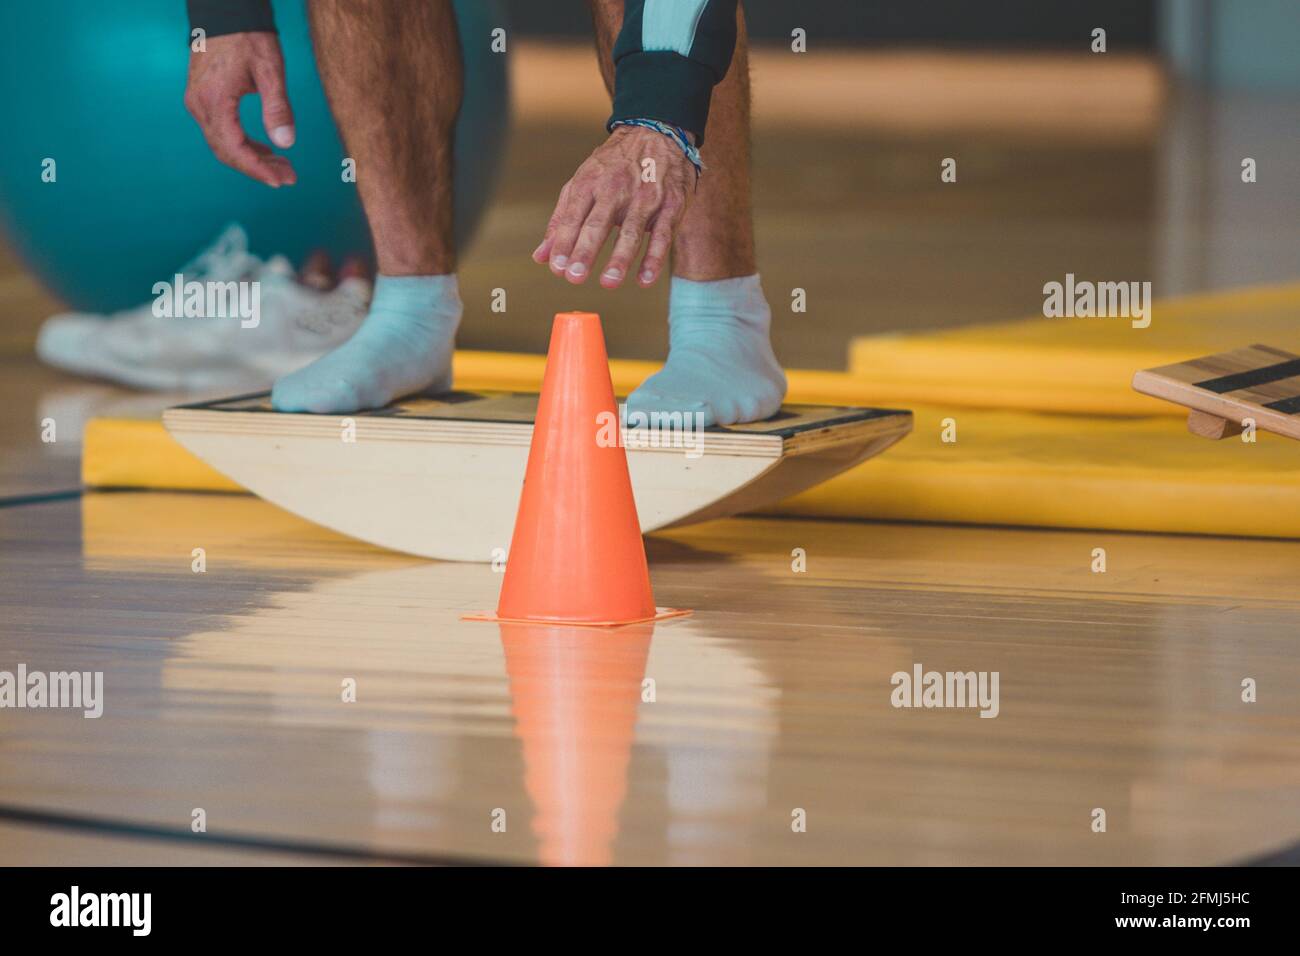 Male trainer seen Touching a cone while on wooden balance board. Different balance sports equipment is seen around in a gym indoors. Stock Photo